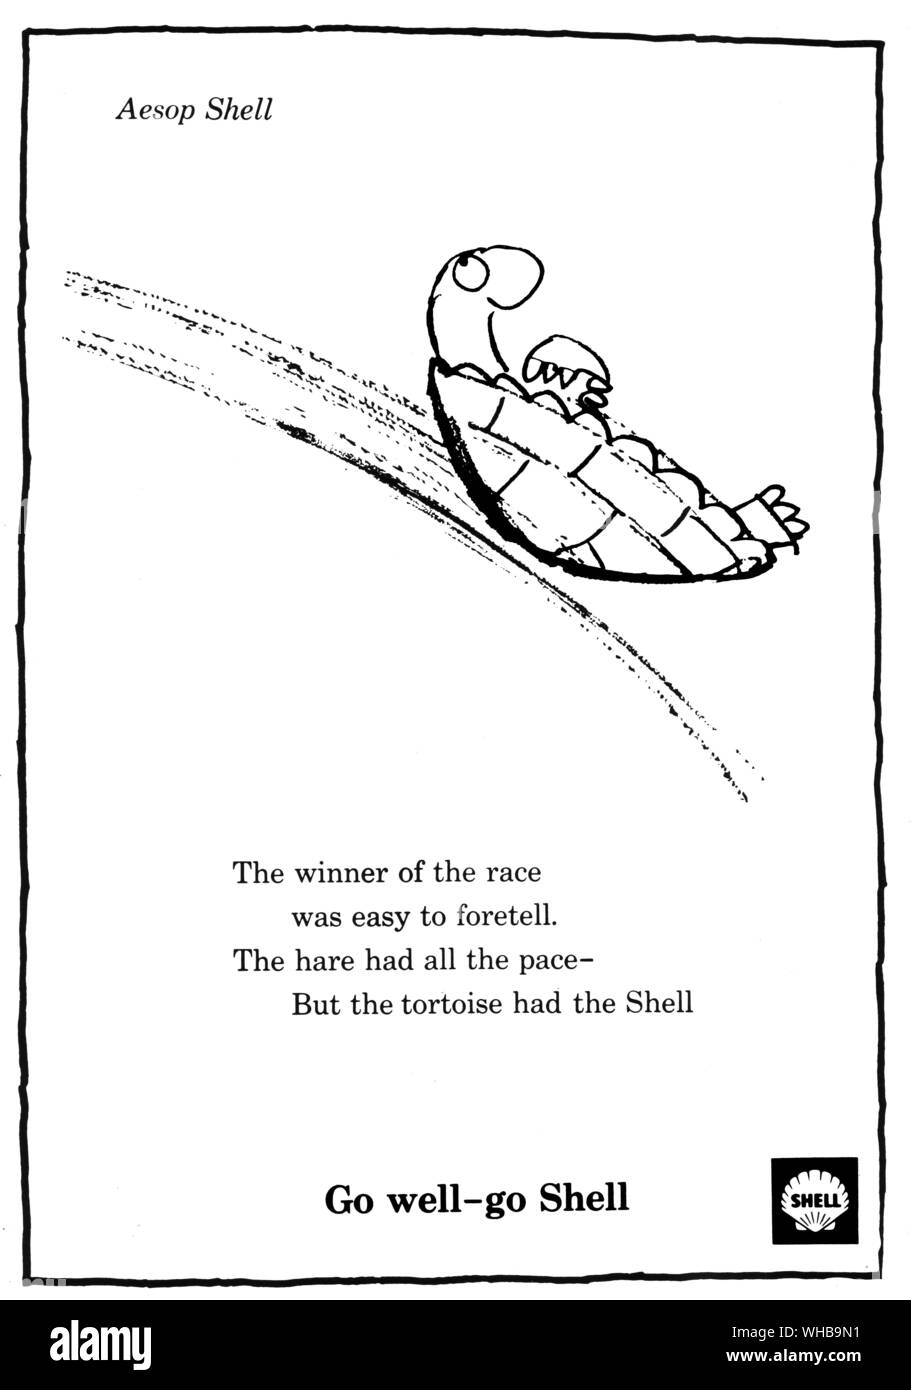 Cartoon - Advertisement - The winner of the race was easy to foretell. The hare had all the pace - but the tortoise had the Shell. - Go well with Shell. Stock Photo